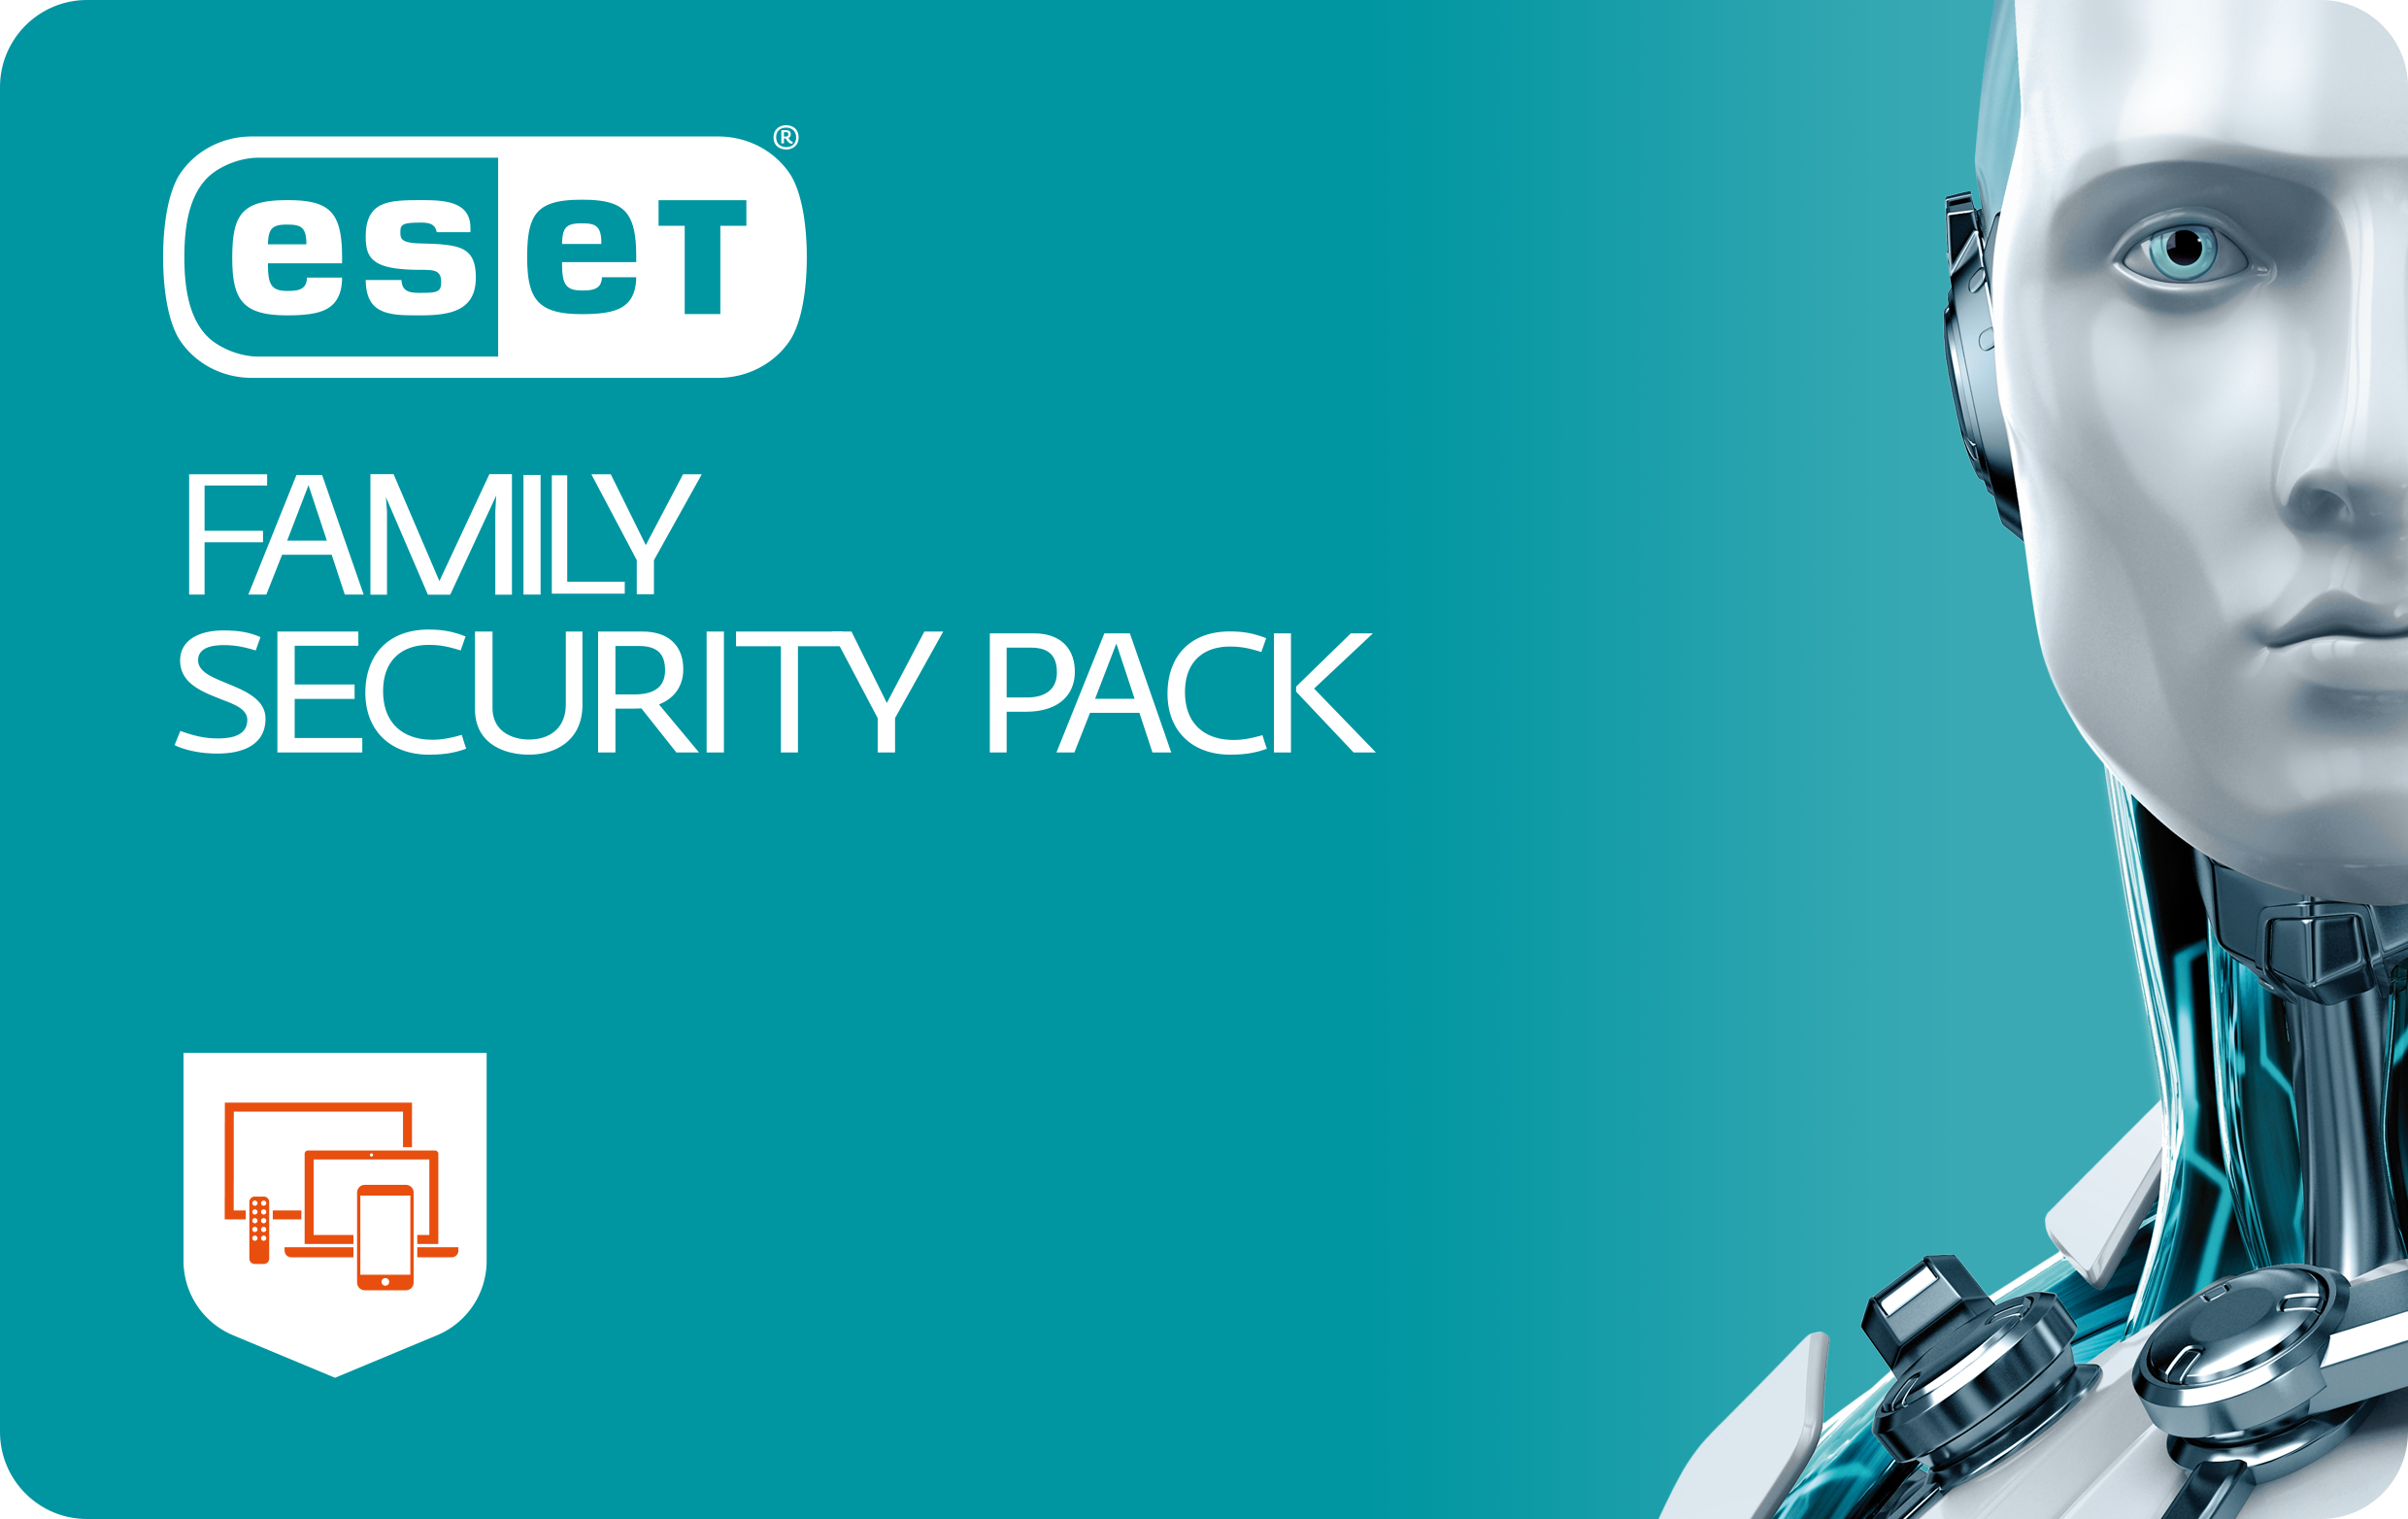 card___eset_family_security_pack___rgb.png